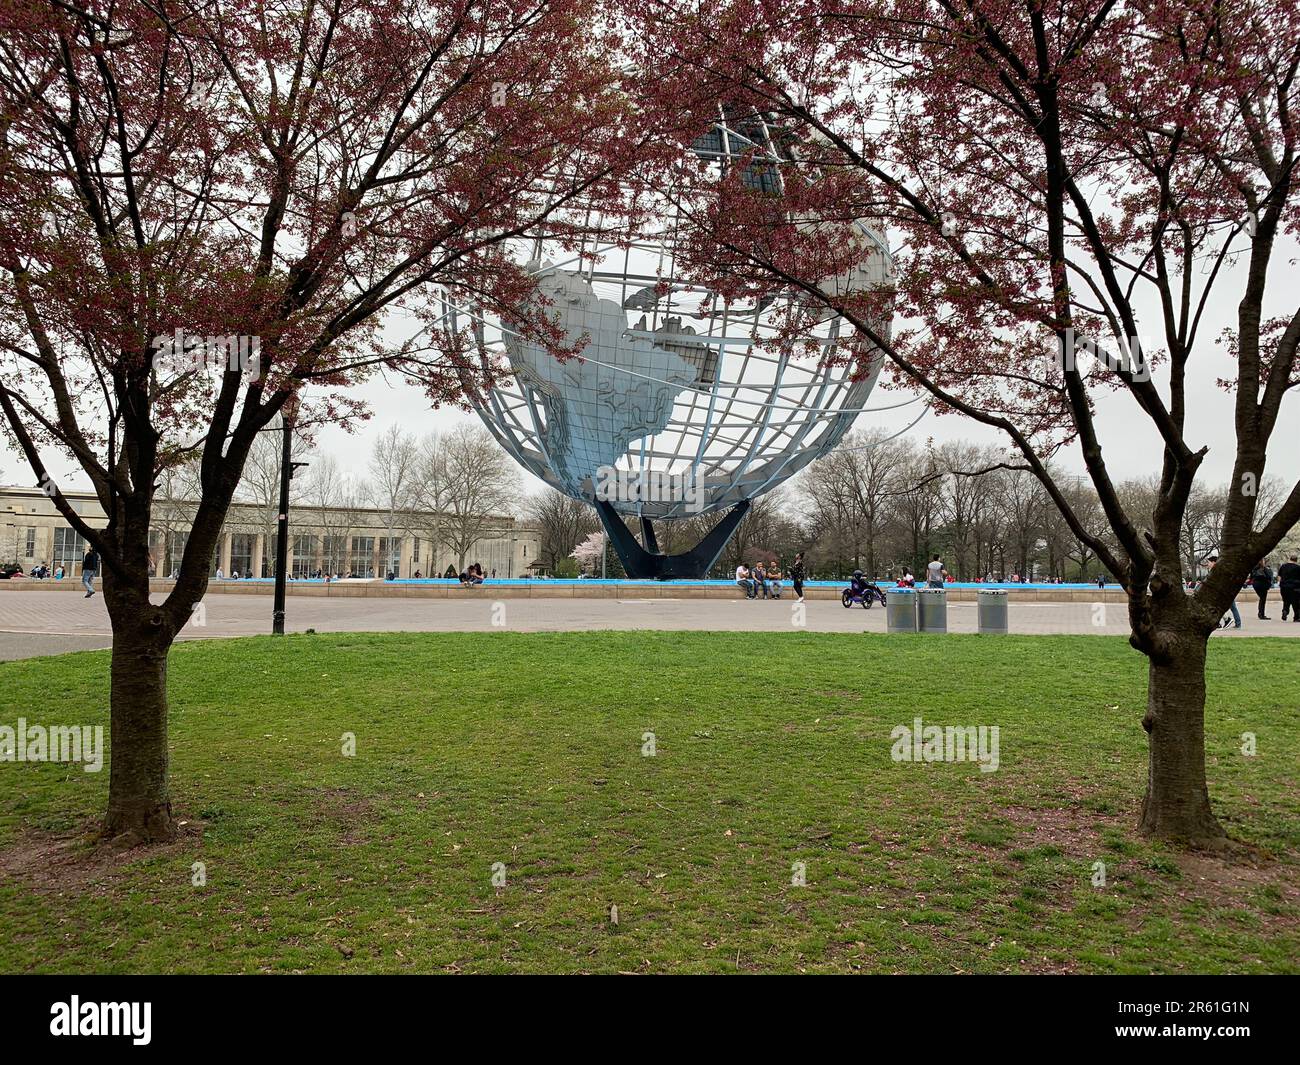 People gather around the Unisphere, a landmark from the 1964 New York Worlds Fair, surrounded by blooming cherry blossom trees in Queens New York City Stock Photo